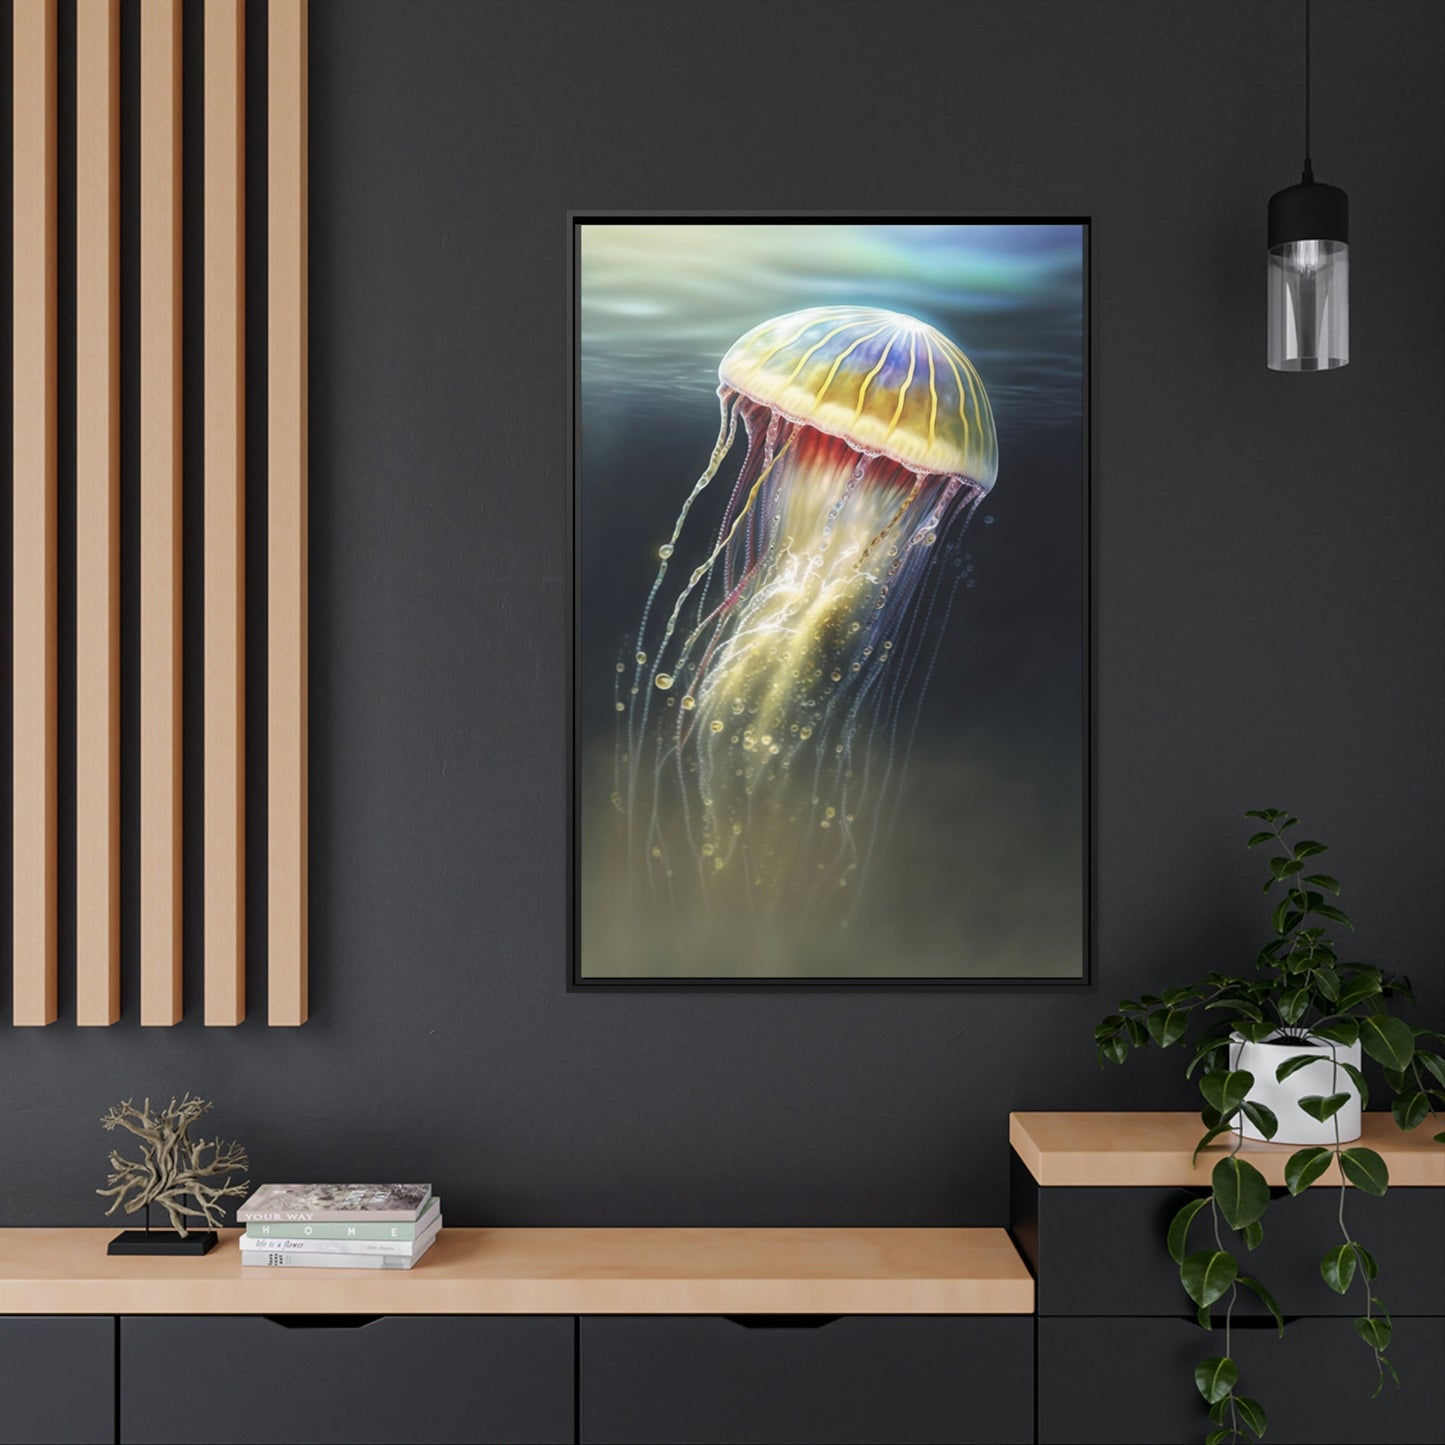 Marine Artistry: Artistic Print on Canvas Featuring Jellyfishes in Motion